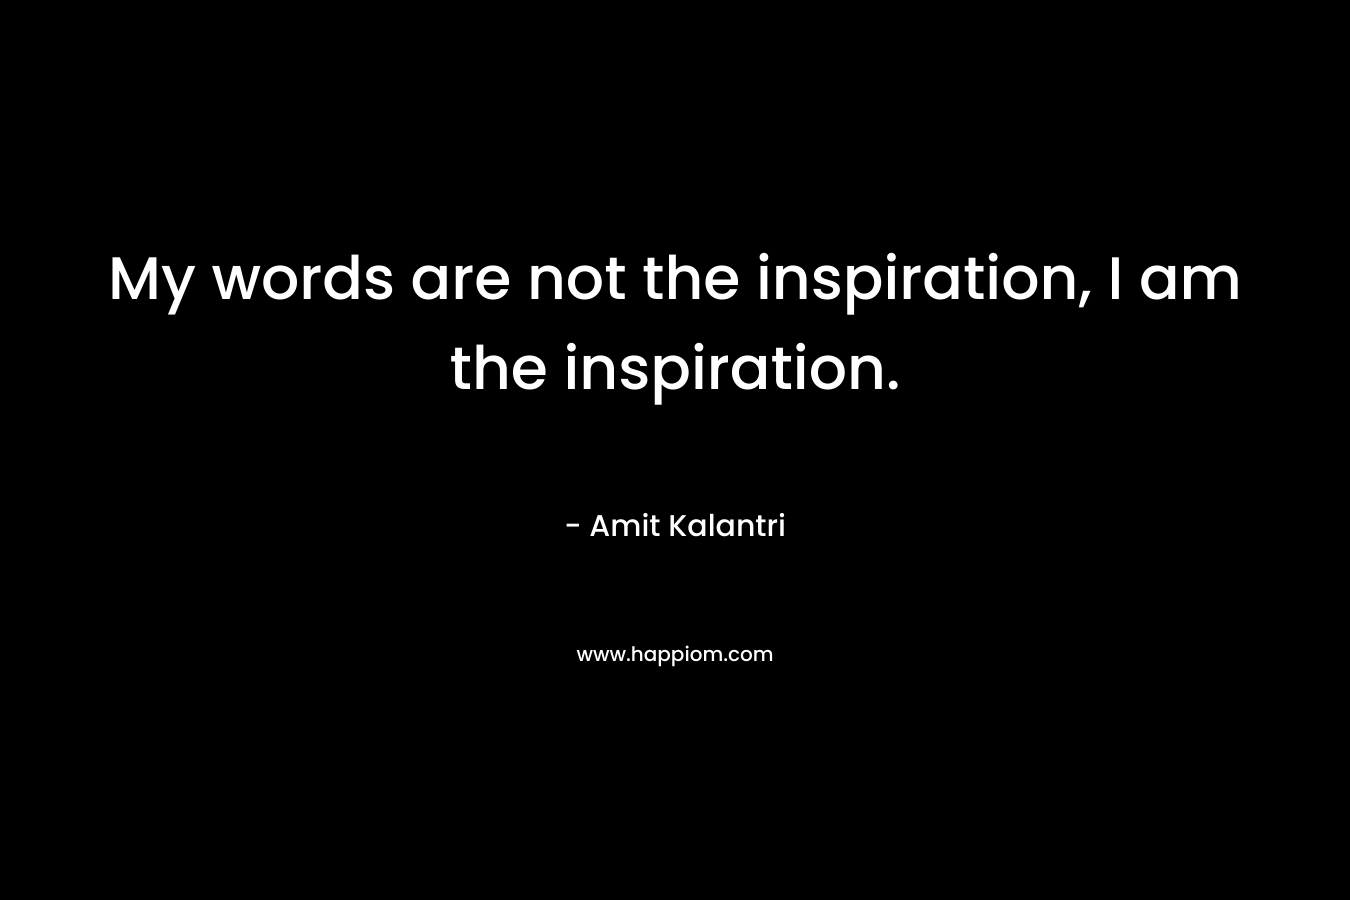 My words are not the inspiration, I am the inspiration.